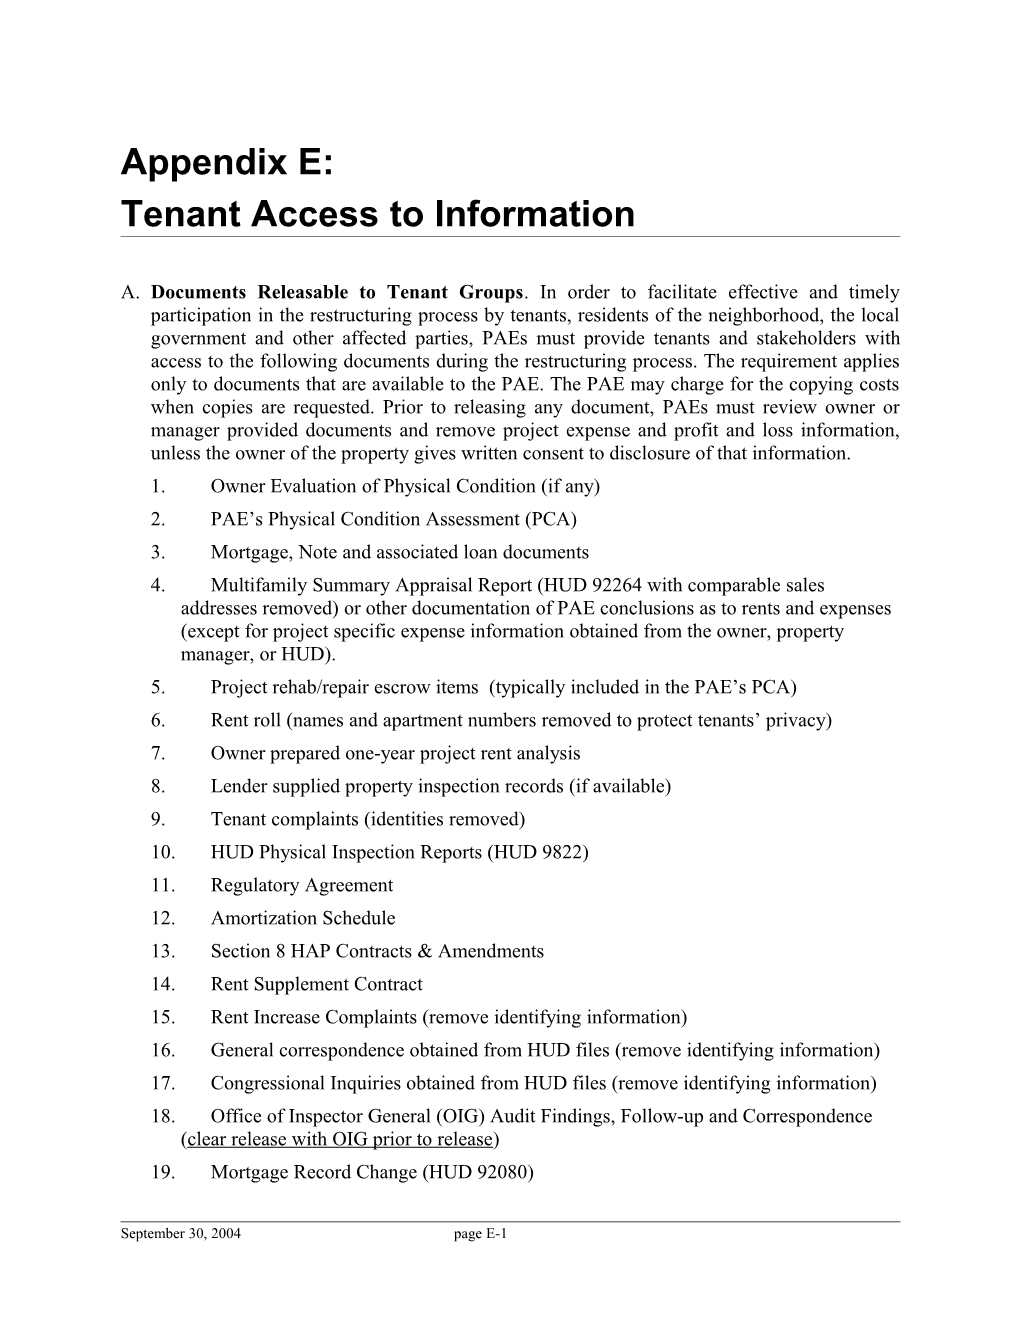 Tenant Access to Information